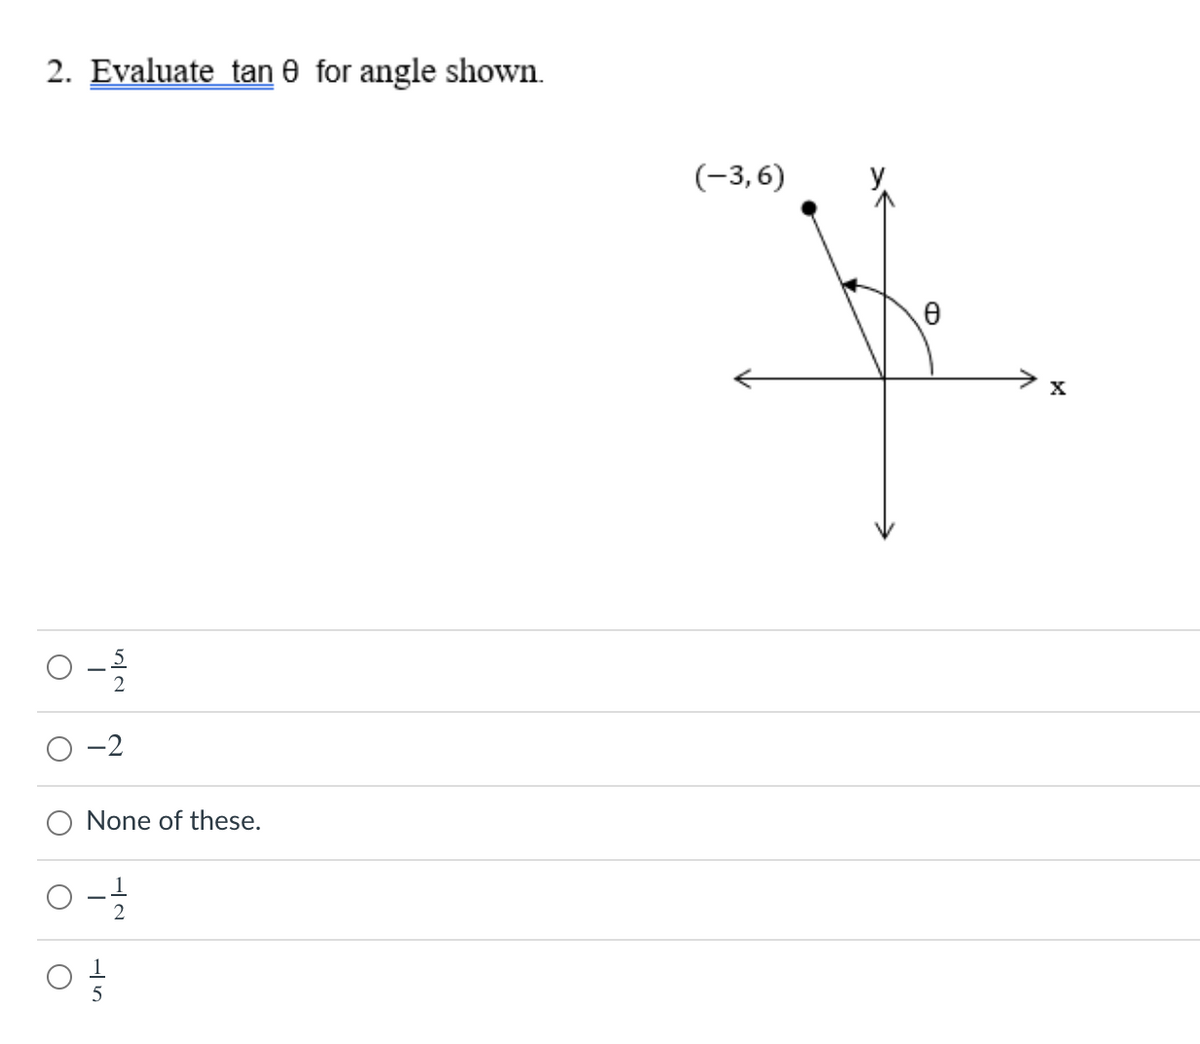 2. Evaluate tan e for angle shown.
(-3,6)
None of these.
5
